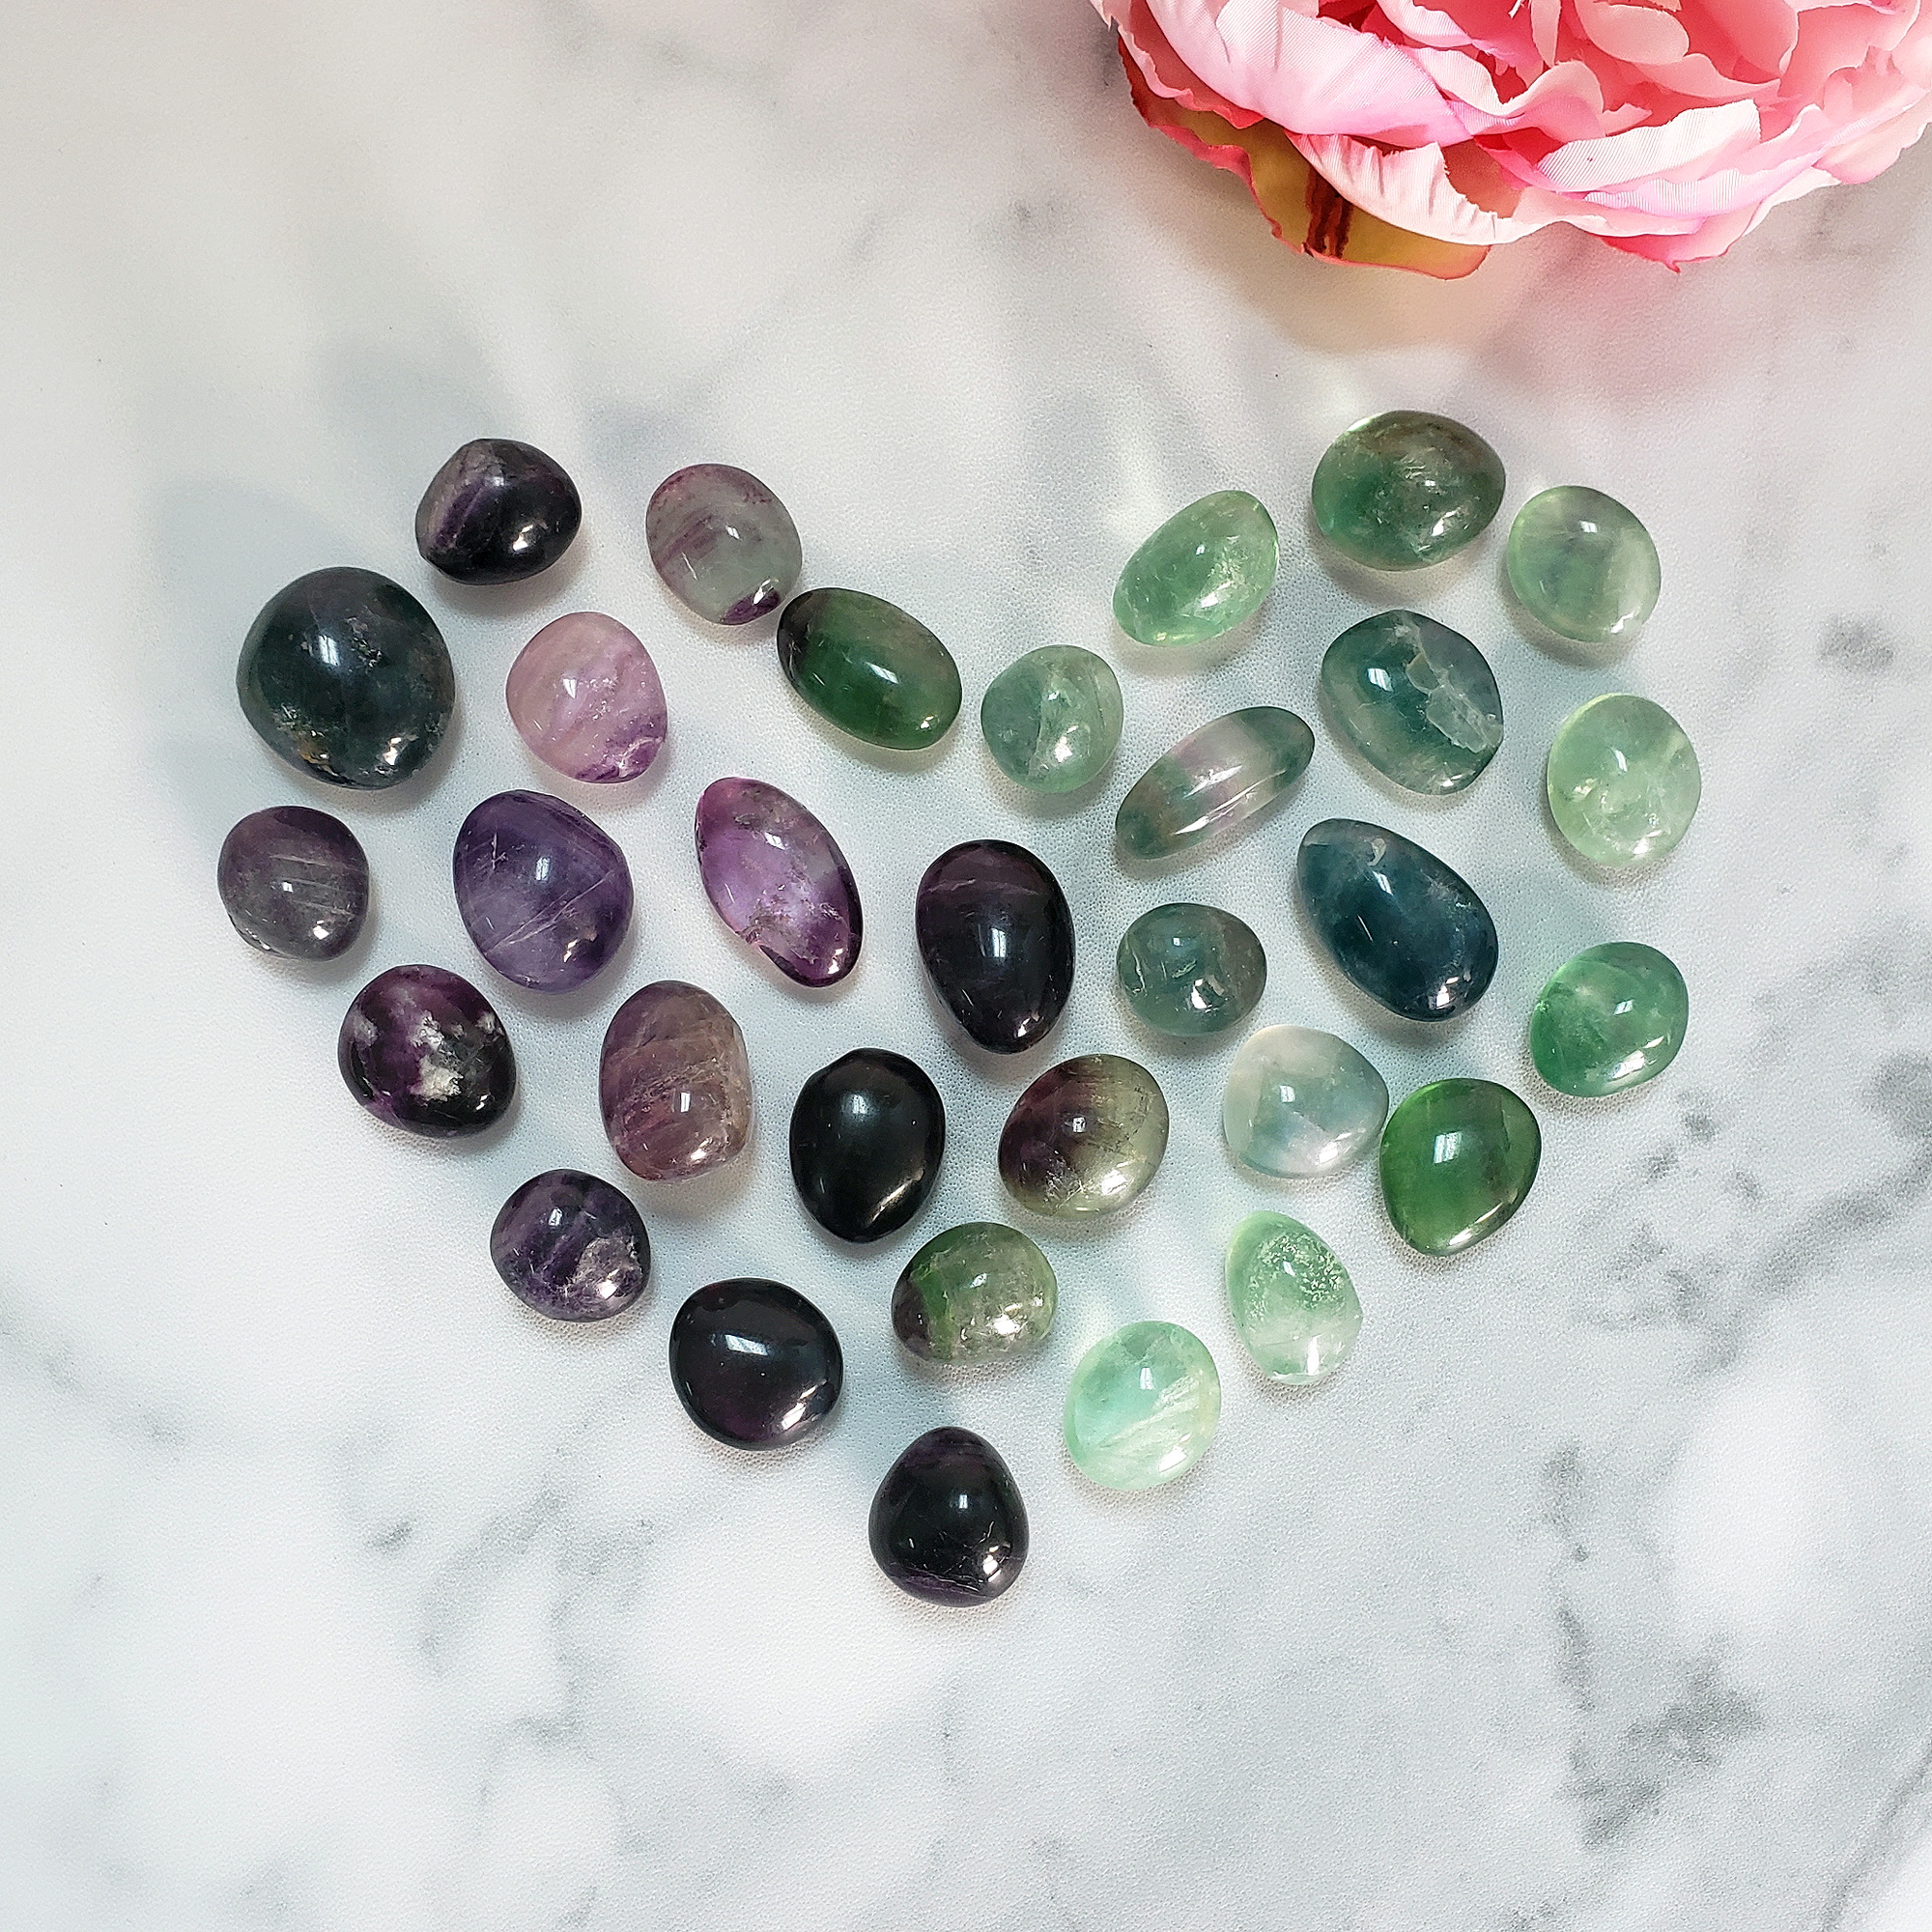 Fluorite Crystal Natural Gemstone Tumbled Stone | High Quality - Fluorite Stones in the Shape of a Heart